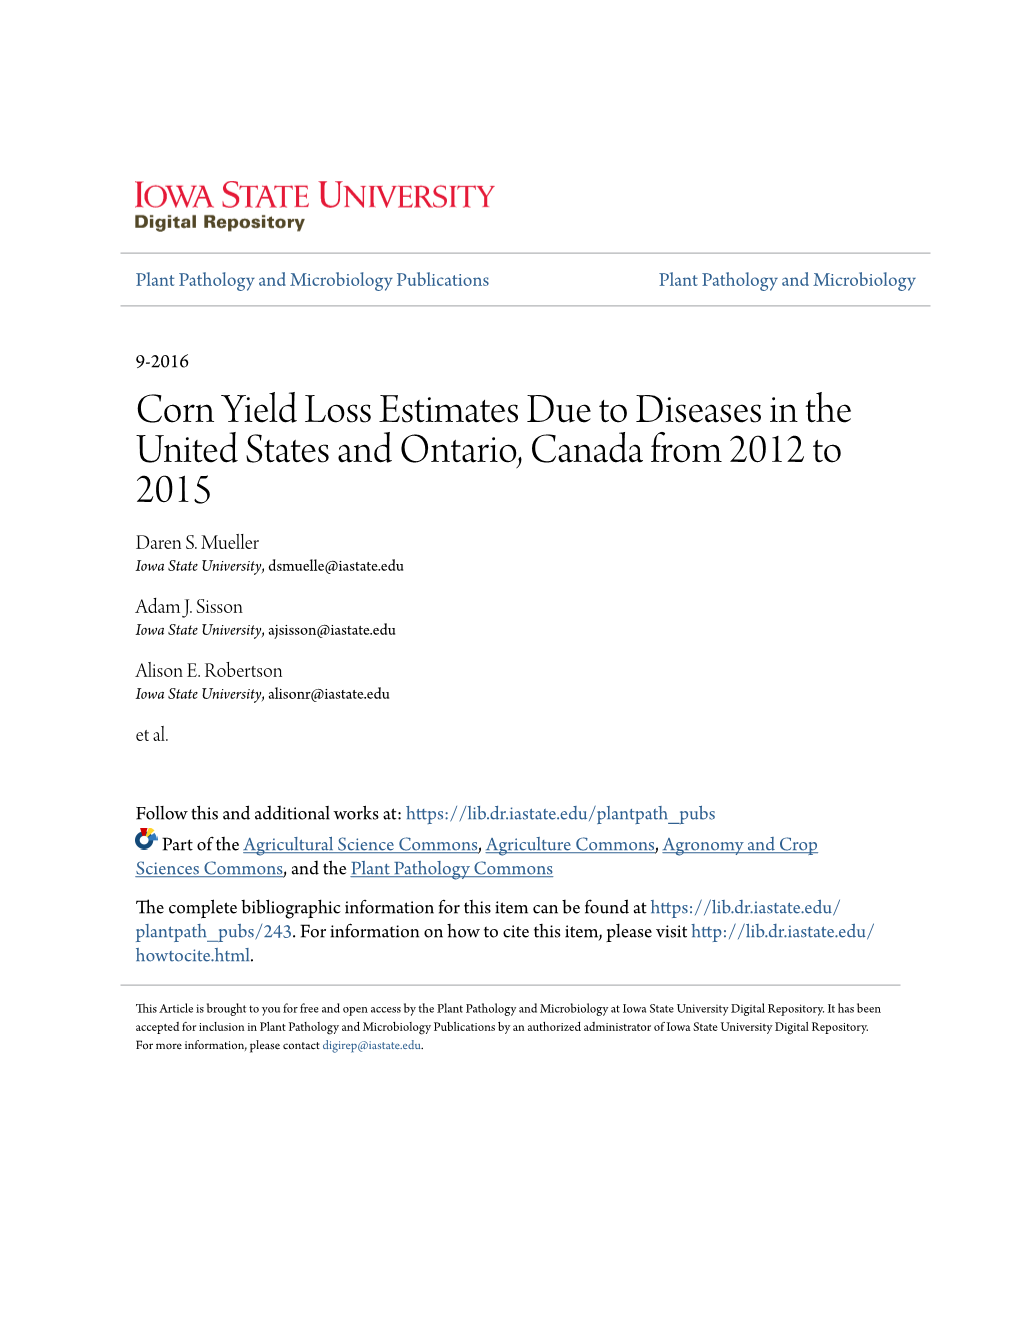 Corn Yield Loss Estimates Due to Diseases in the United States and Ontario, Canada from 2012 to 2015 Daren S